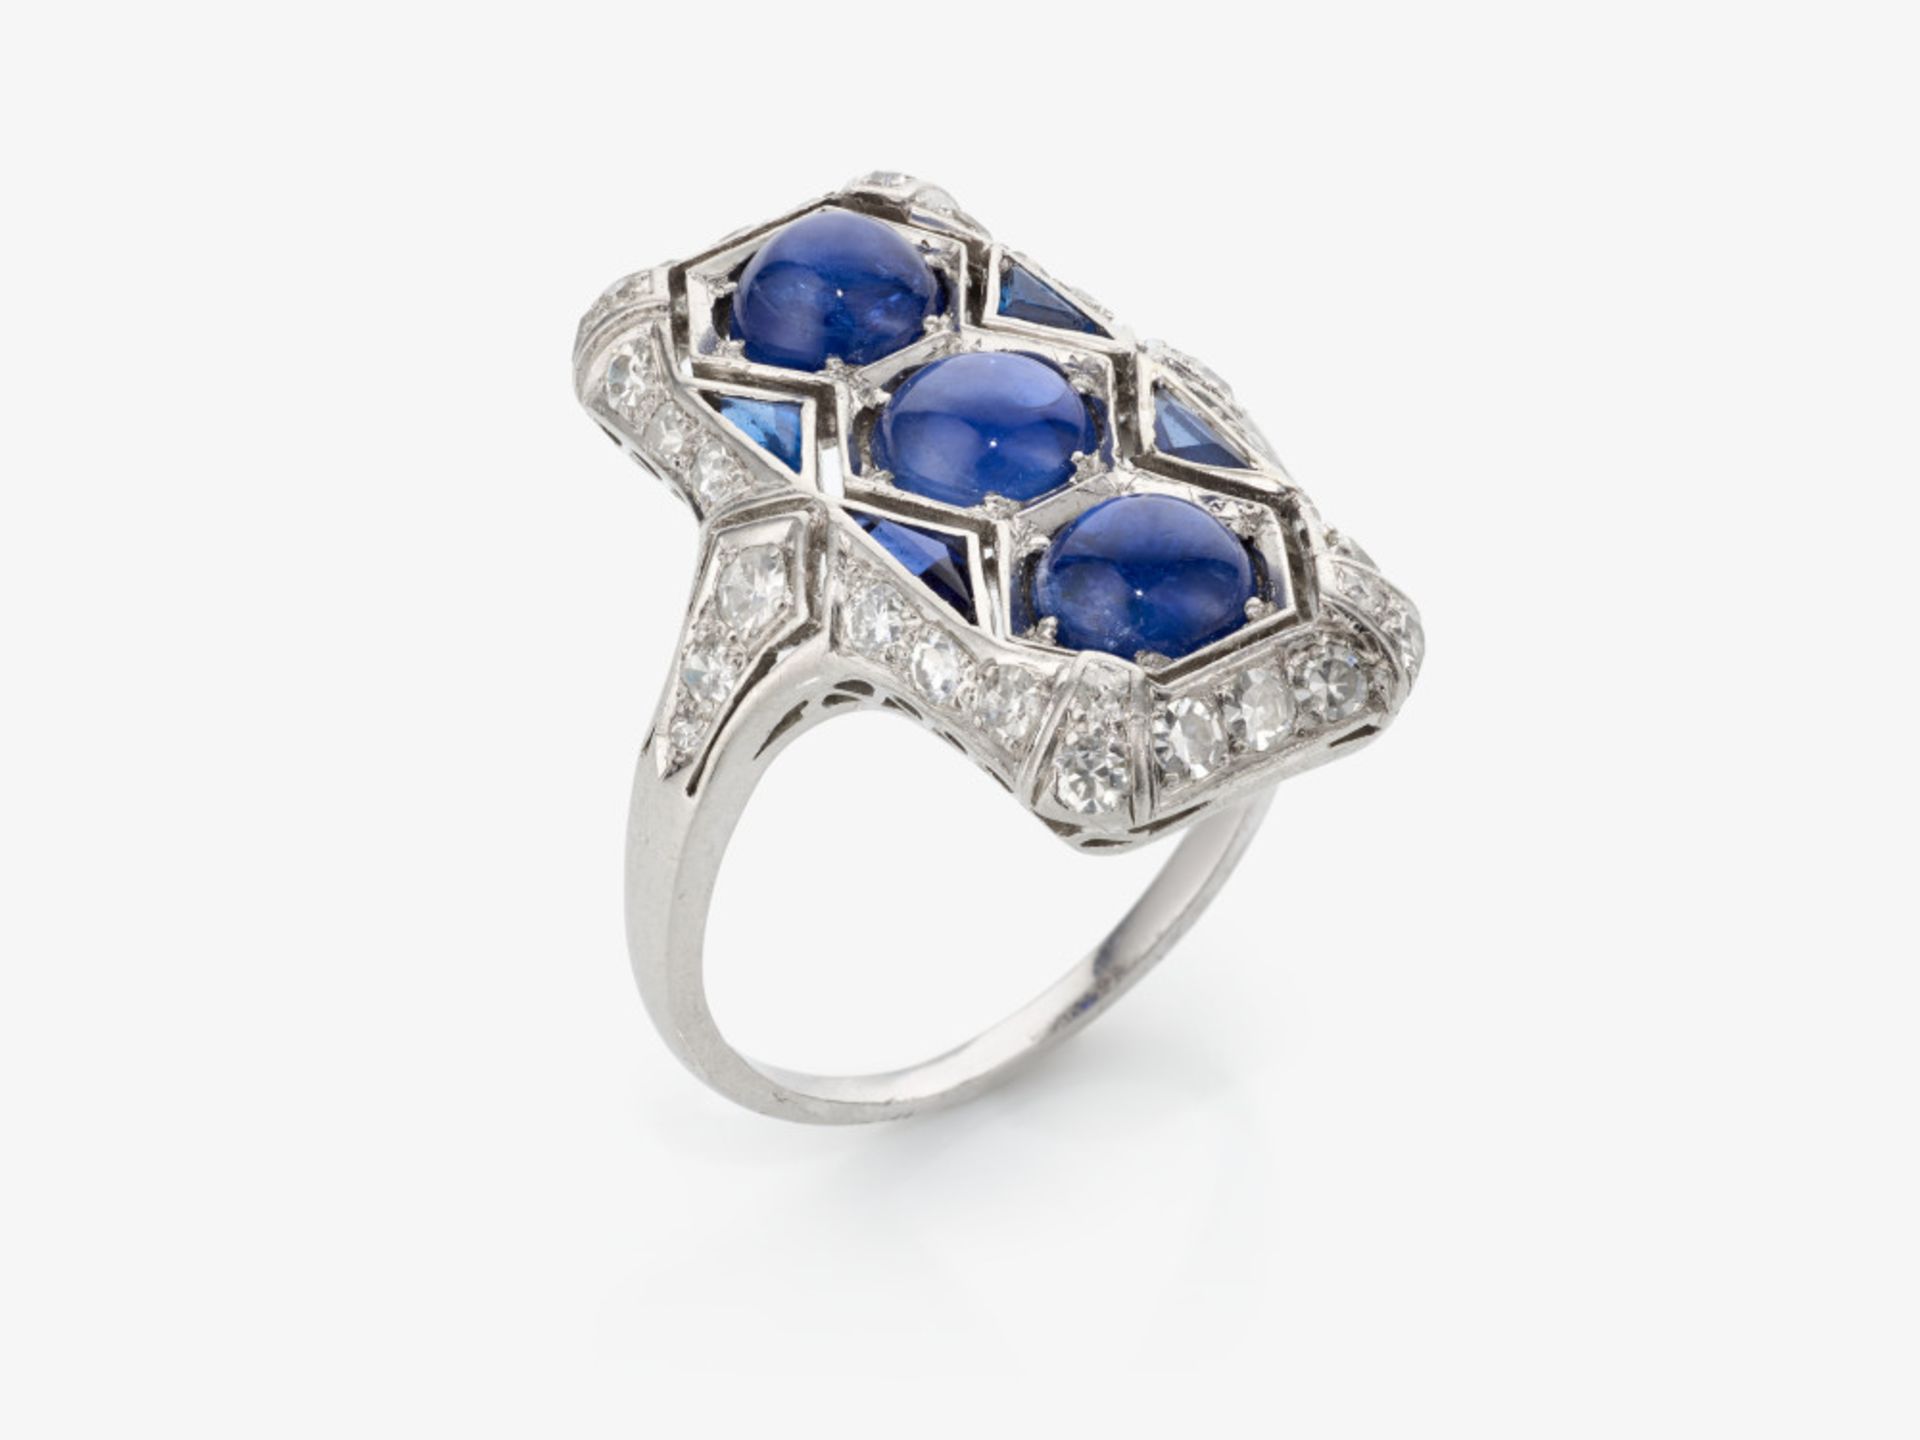 A historical ring decorated with sapphires and diamonds - Image 2 of 4